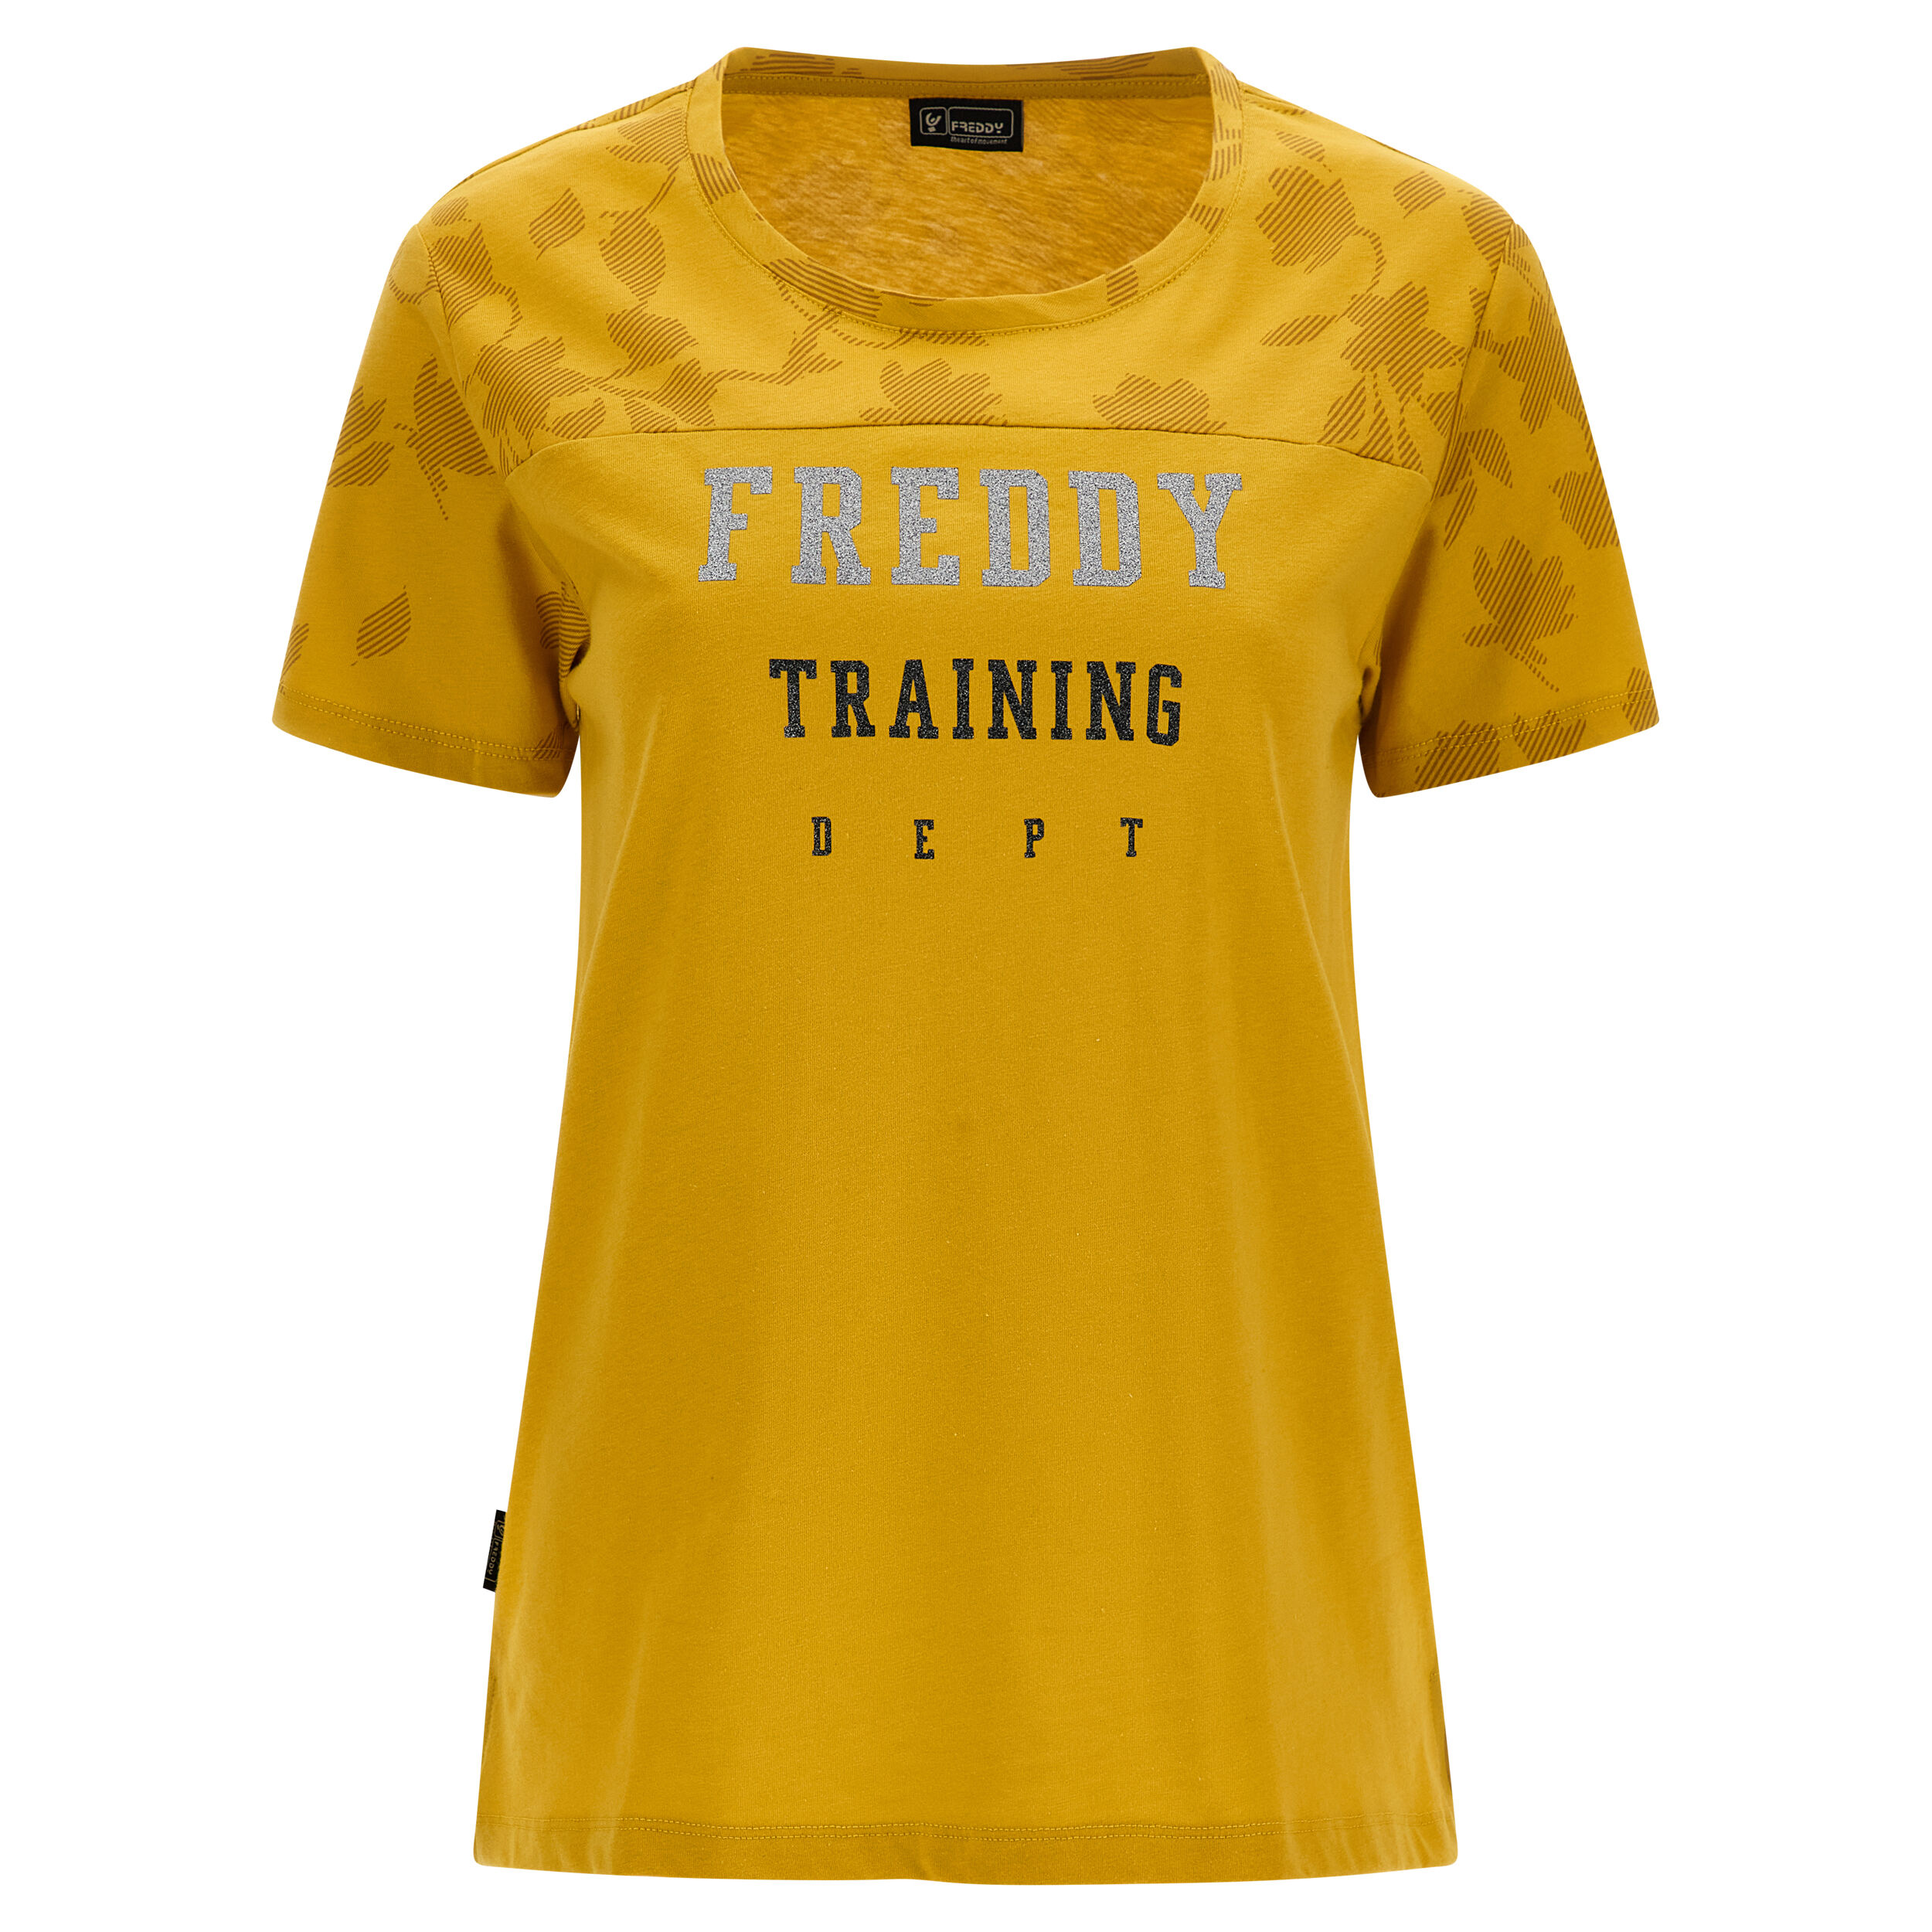 Freddy T-shirt comfort fit con maniche e spalle stampa floreale Yellow-Allover Flower Yellow Donna Small